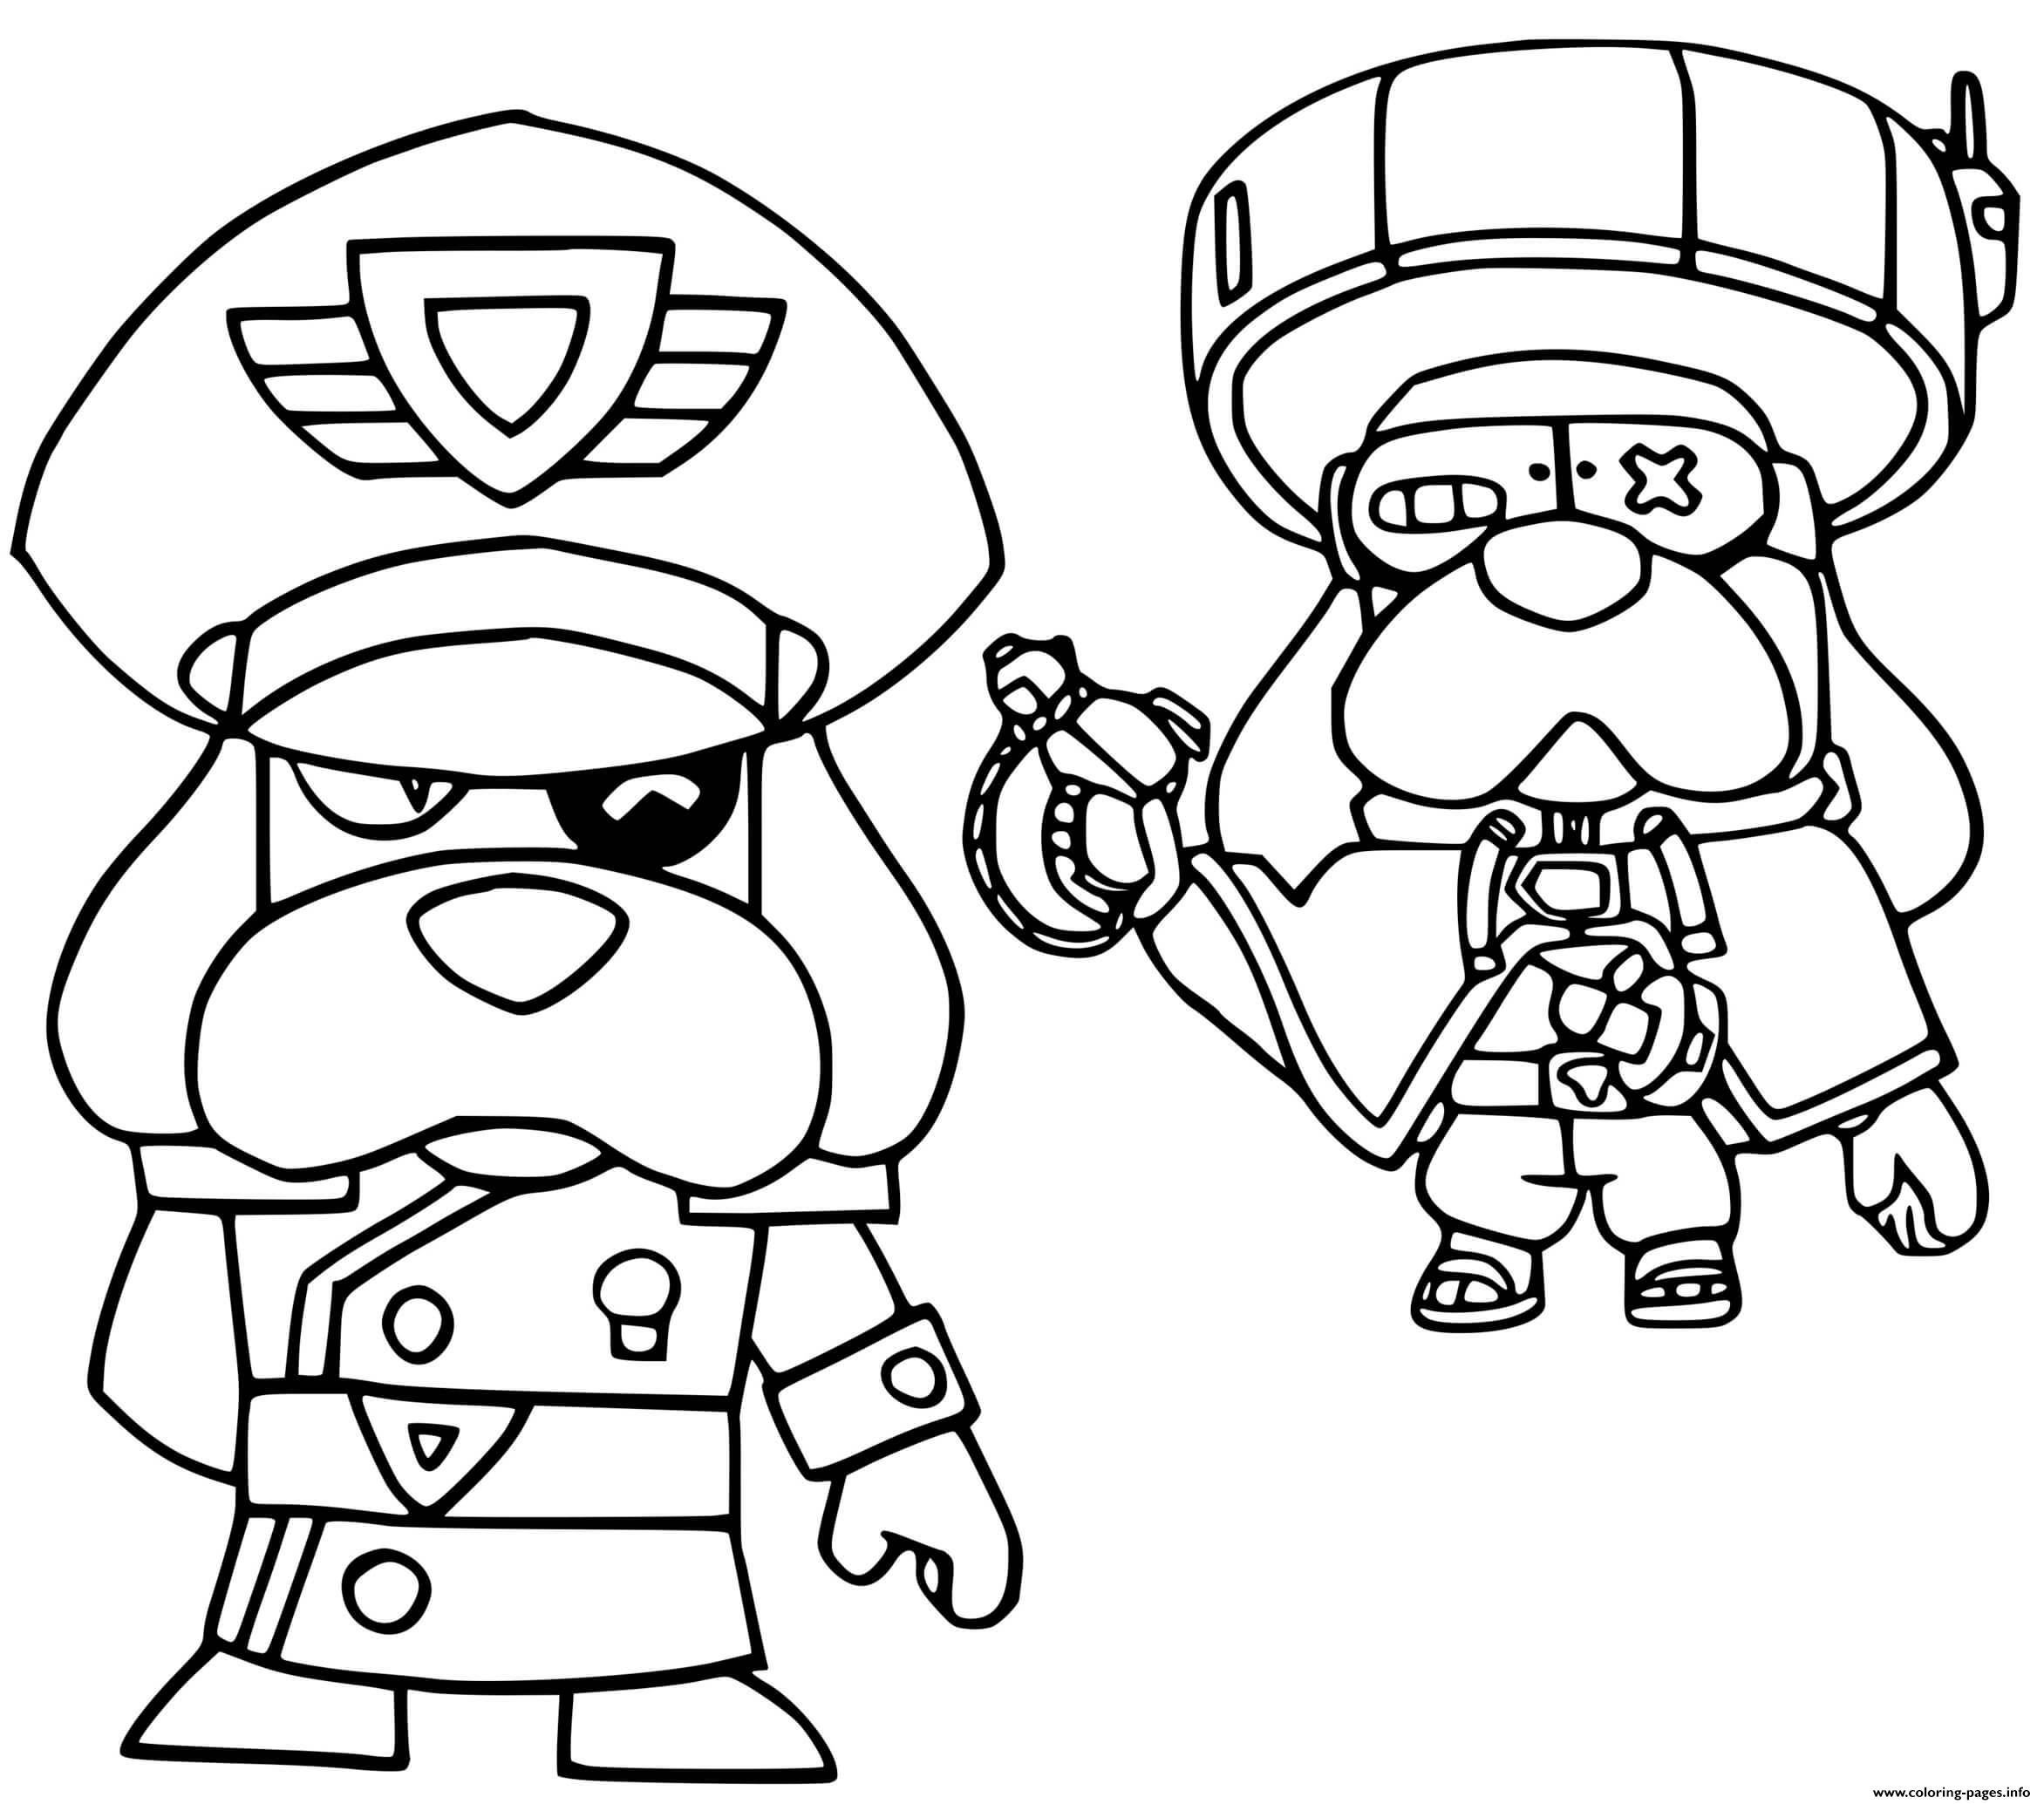 Brawl Stars Force Starr Colonel Medor Et Medor Ronin Coloring Pages Printable - coloriage brawl star tara